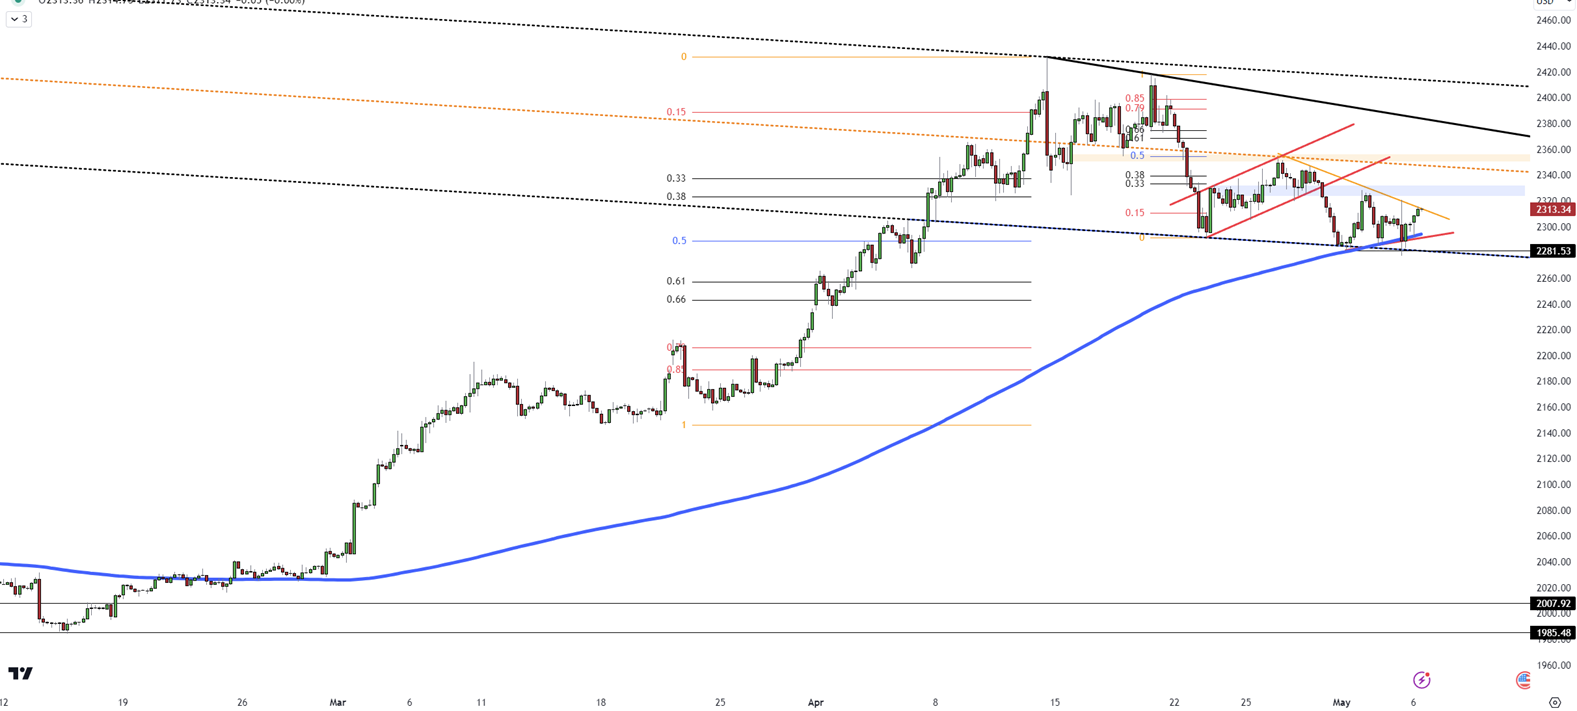 Gold Consolidates in Channel, Breakout Direction Expected